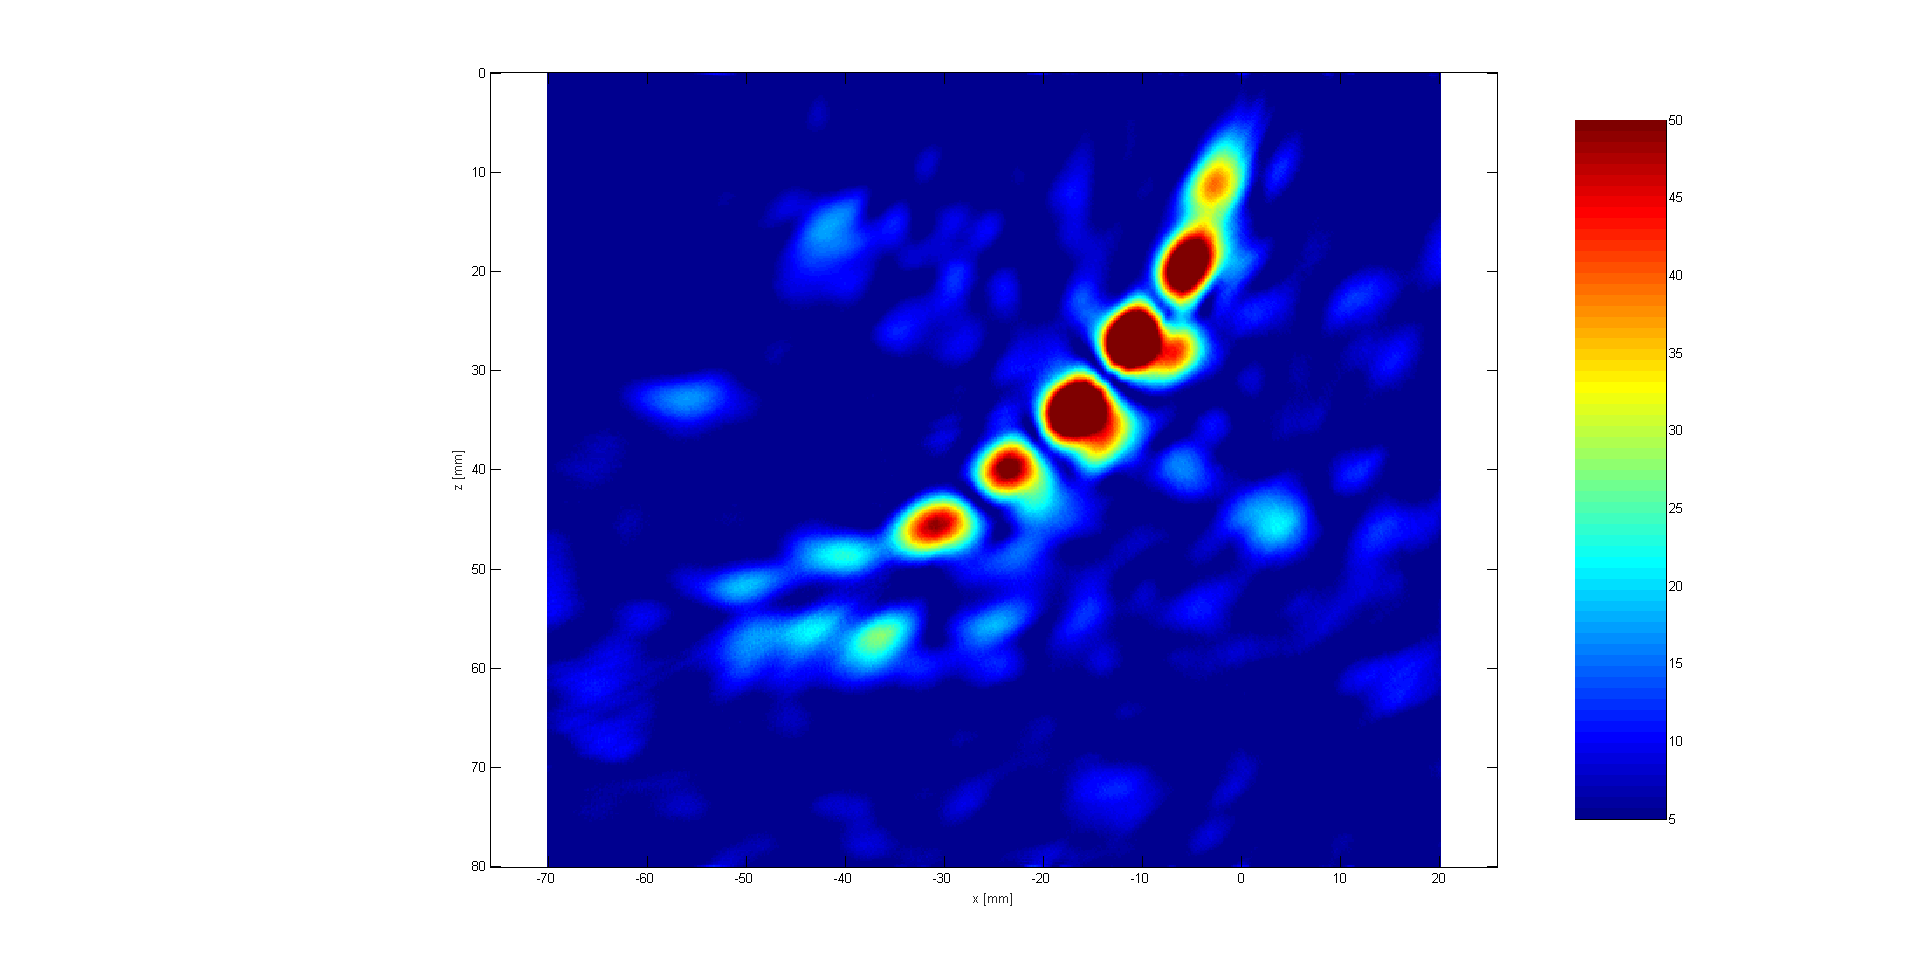 Image of Large R holes using 1 MHz probe